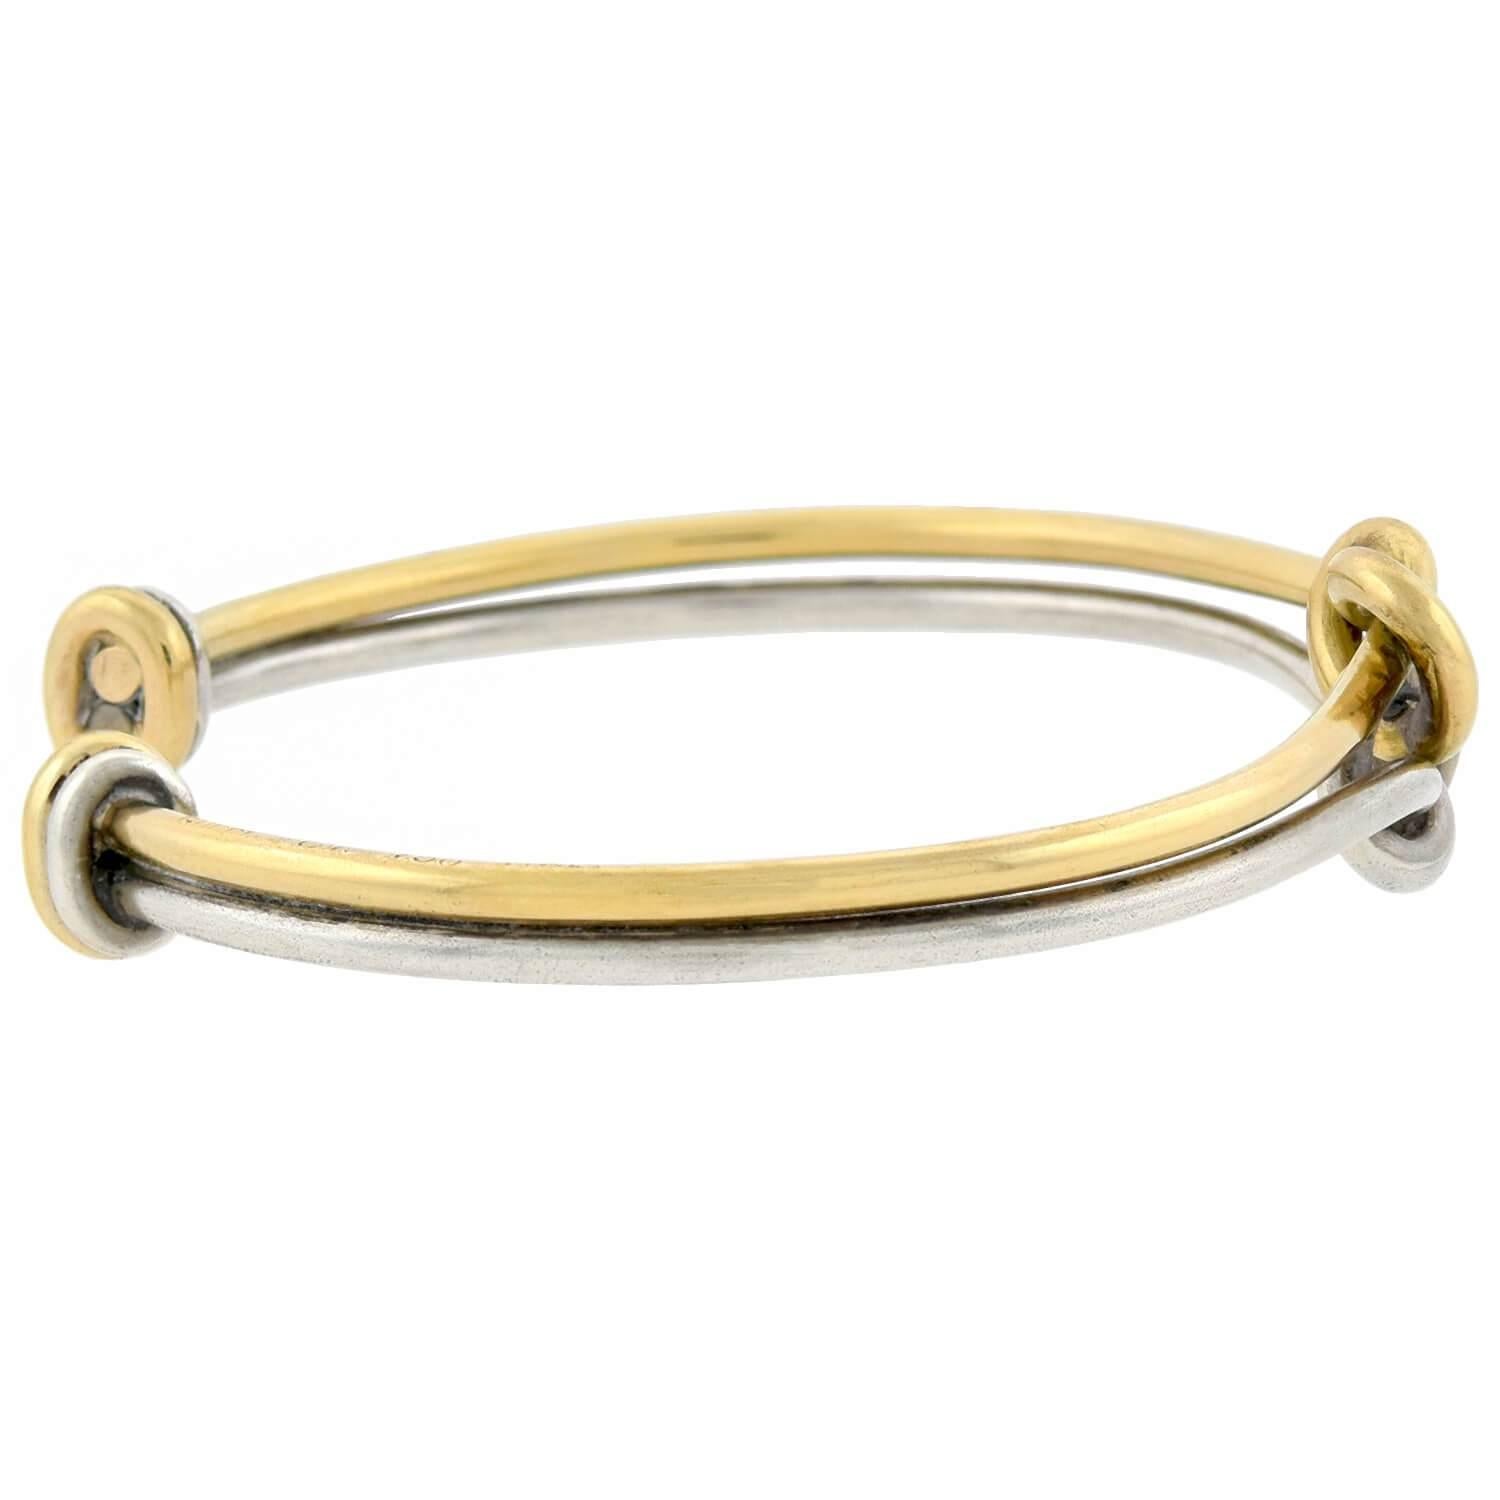 A stunning Estate love knot cuff bracelet from legendary maker Gucci! Crafted in 18kt yellow gold and sterling silver, this gorgeous piece features a large love knot design at its center. The cuff style bracelet is comprised of one gold and one